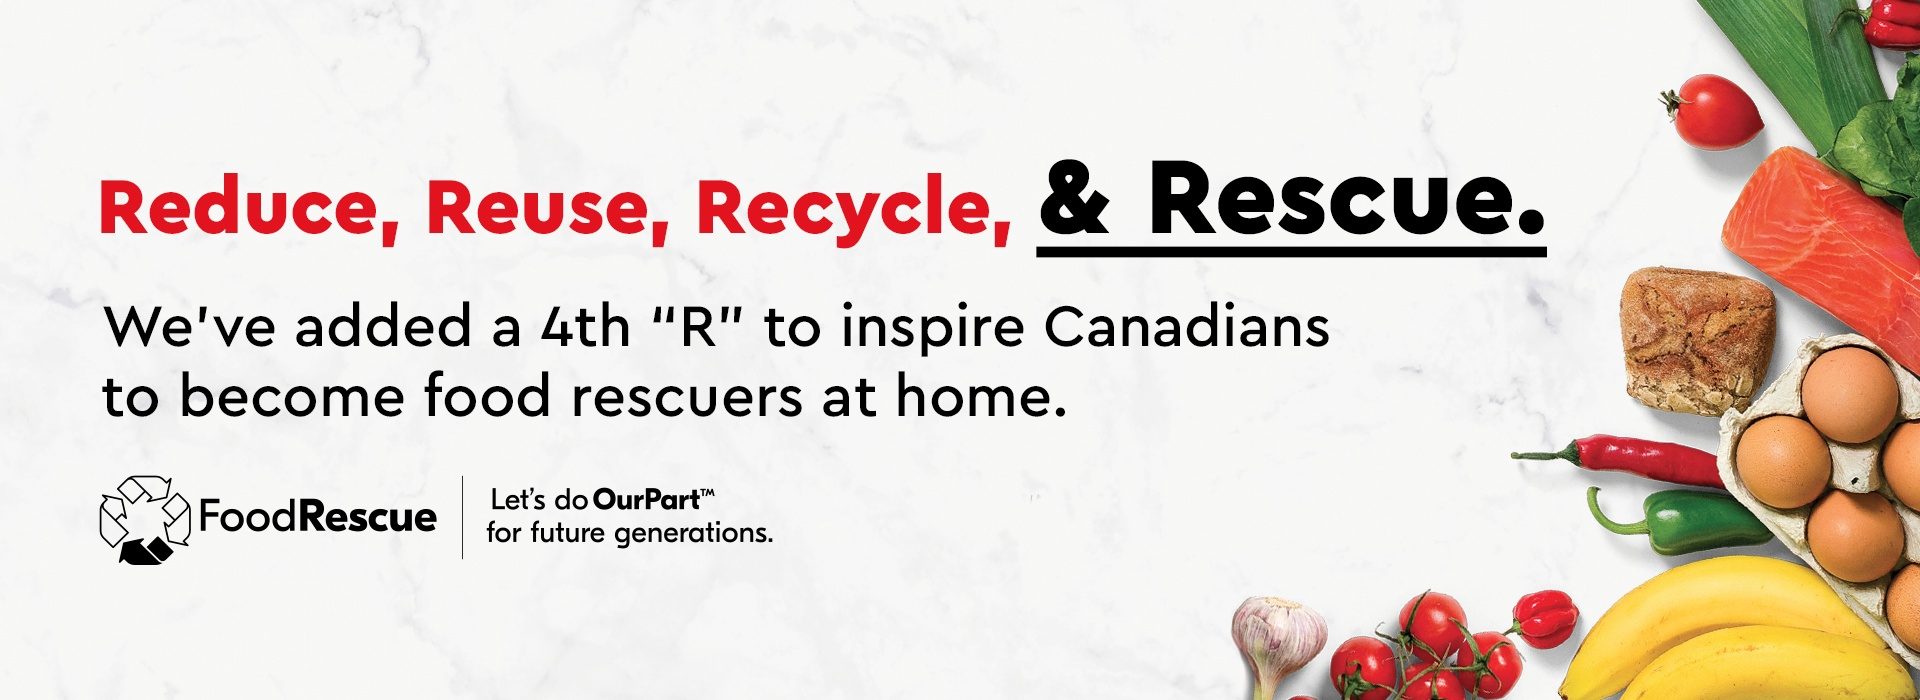 Text Reading 'Reduce, Reuse, Recycle and Rescue. We've added a 4th 'R' to inspire Canadians to become food rescuers at home. Let's do Our Part for future generations.'